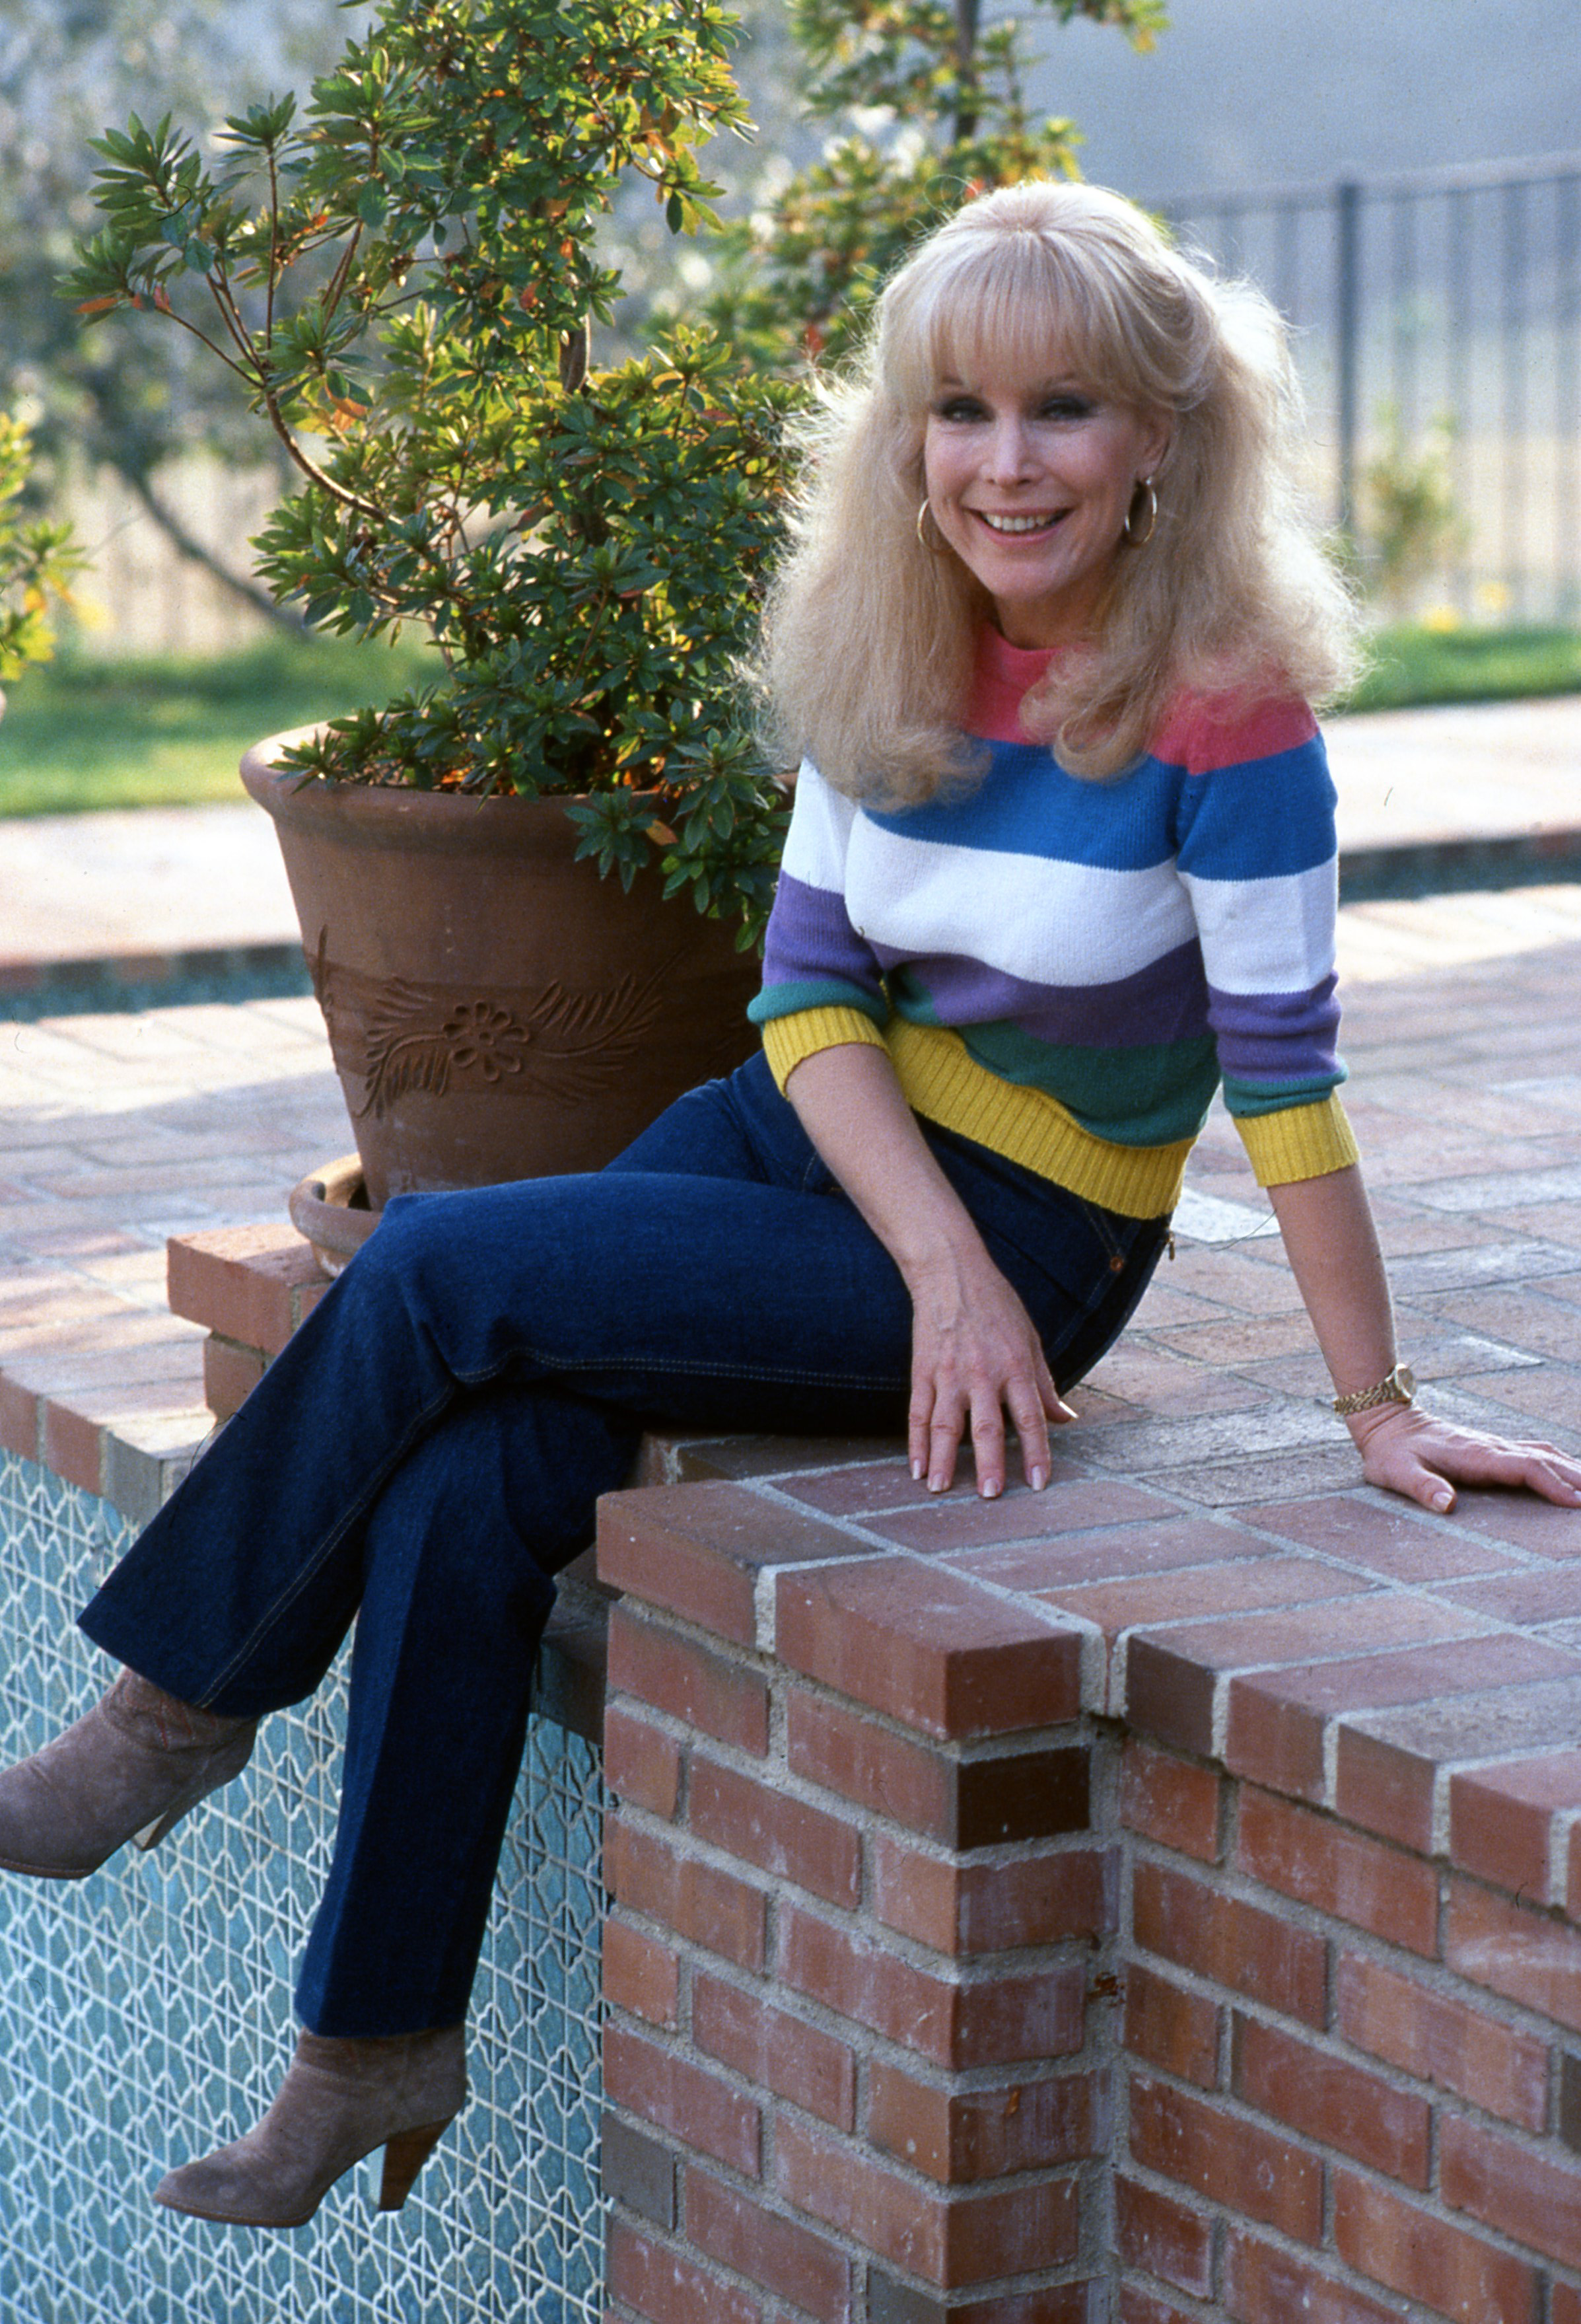 Barbara Eden poses for a portrait in 1980 in Los Angeles, California. | Source: Getty Images